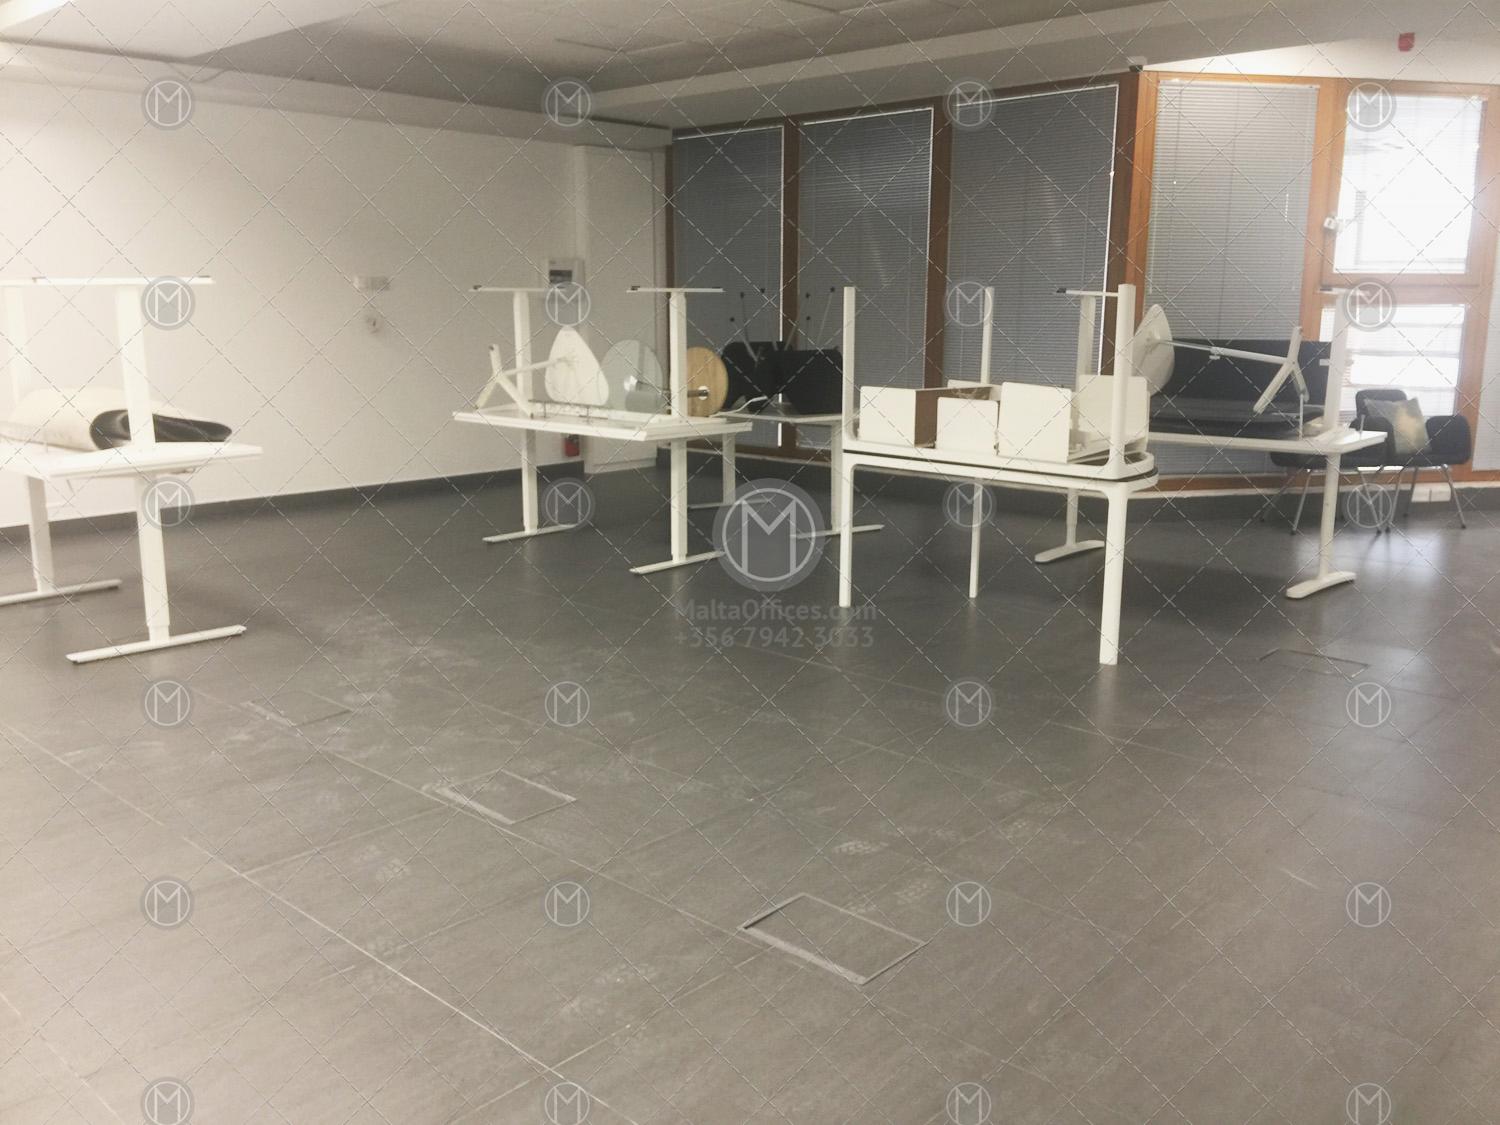 Sliema Central Office for Rent (180sqm)